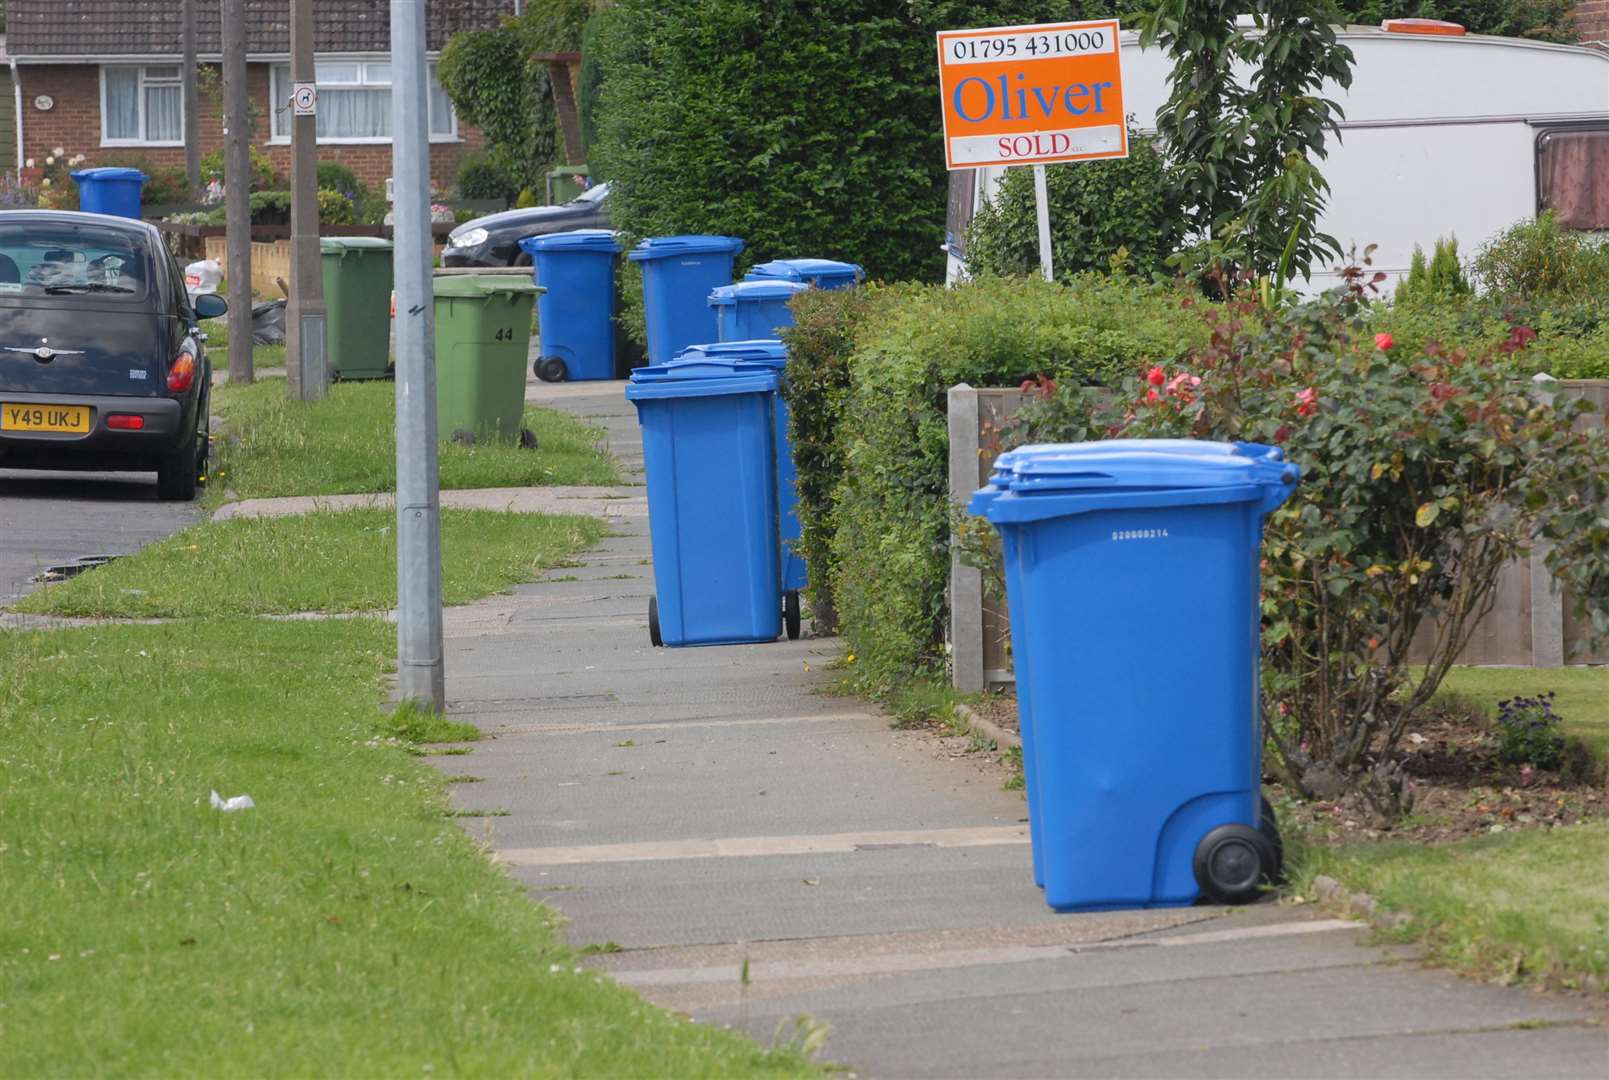 Swale council has warned that bin collections could be impacted by a lack of staff because they are self isolating